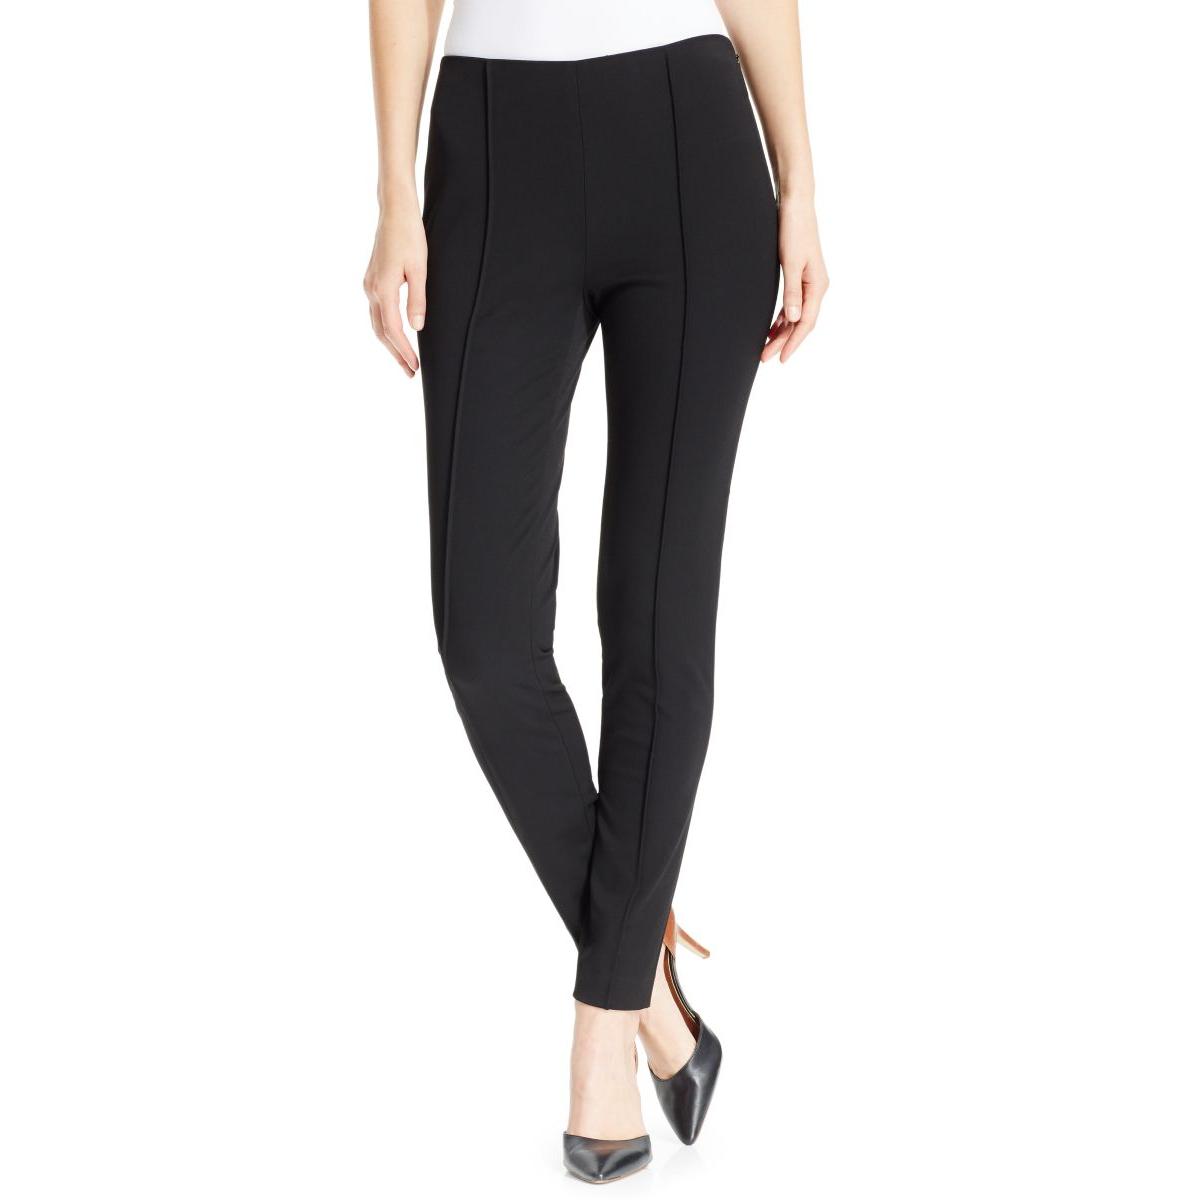 Vince Camuto 0871 Womens Stretch Skinny Leg Seamed Dress Pants Trousers ...